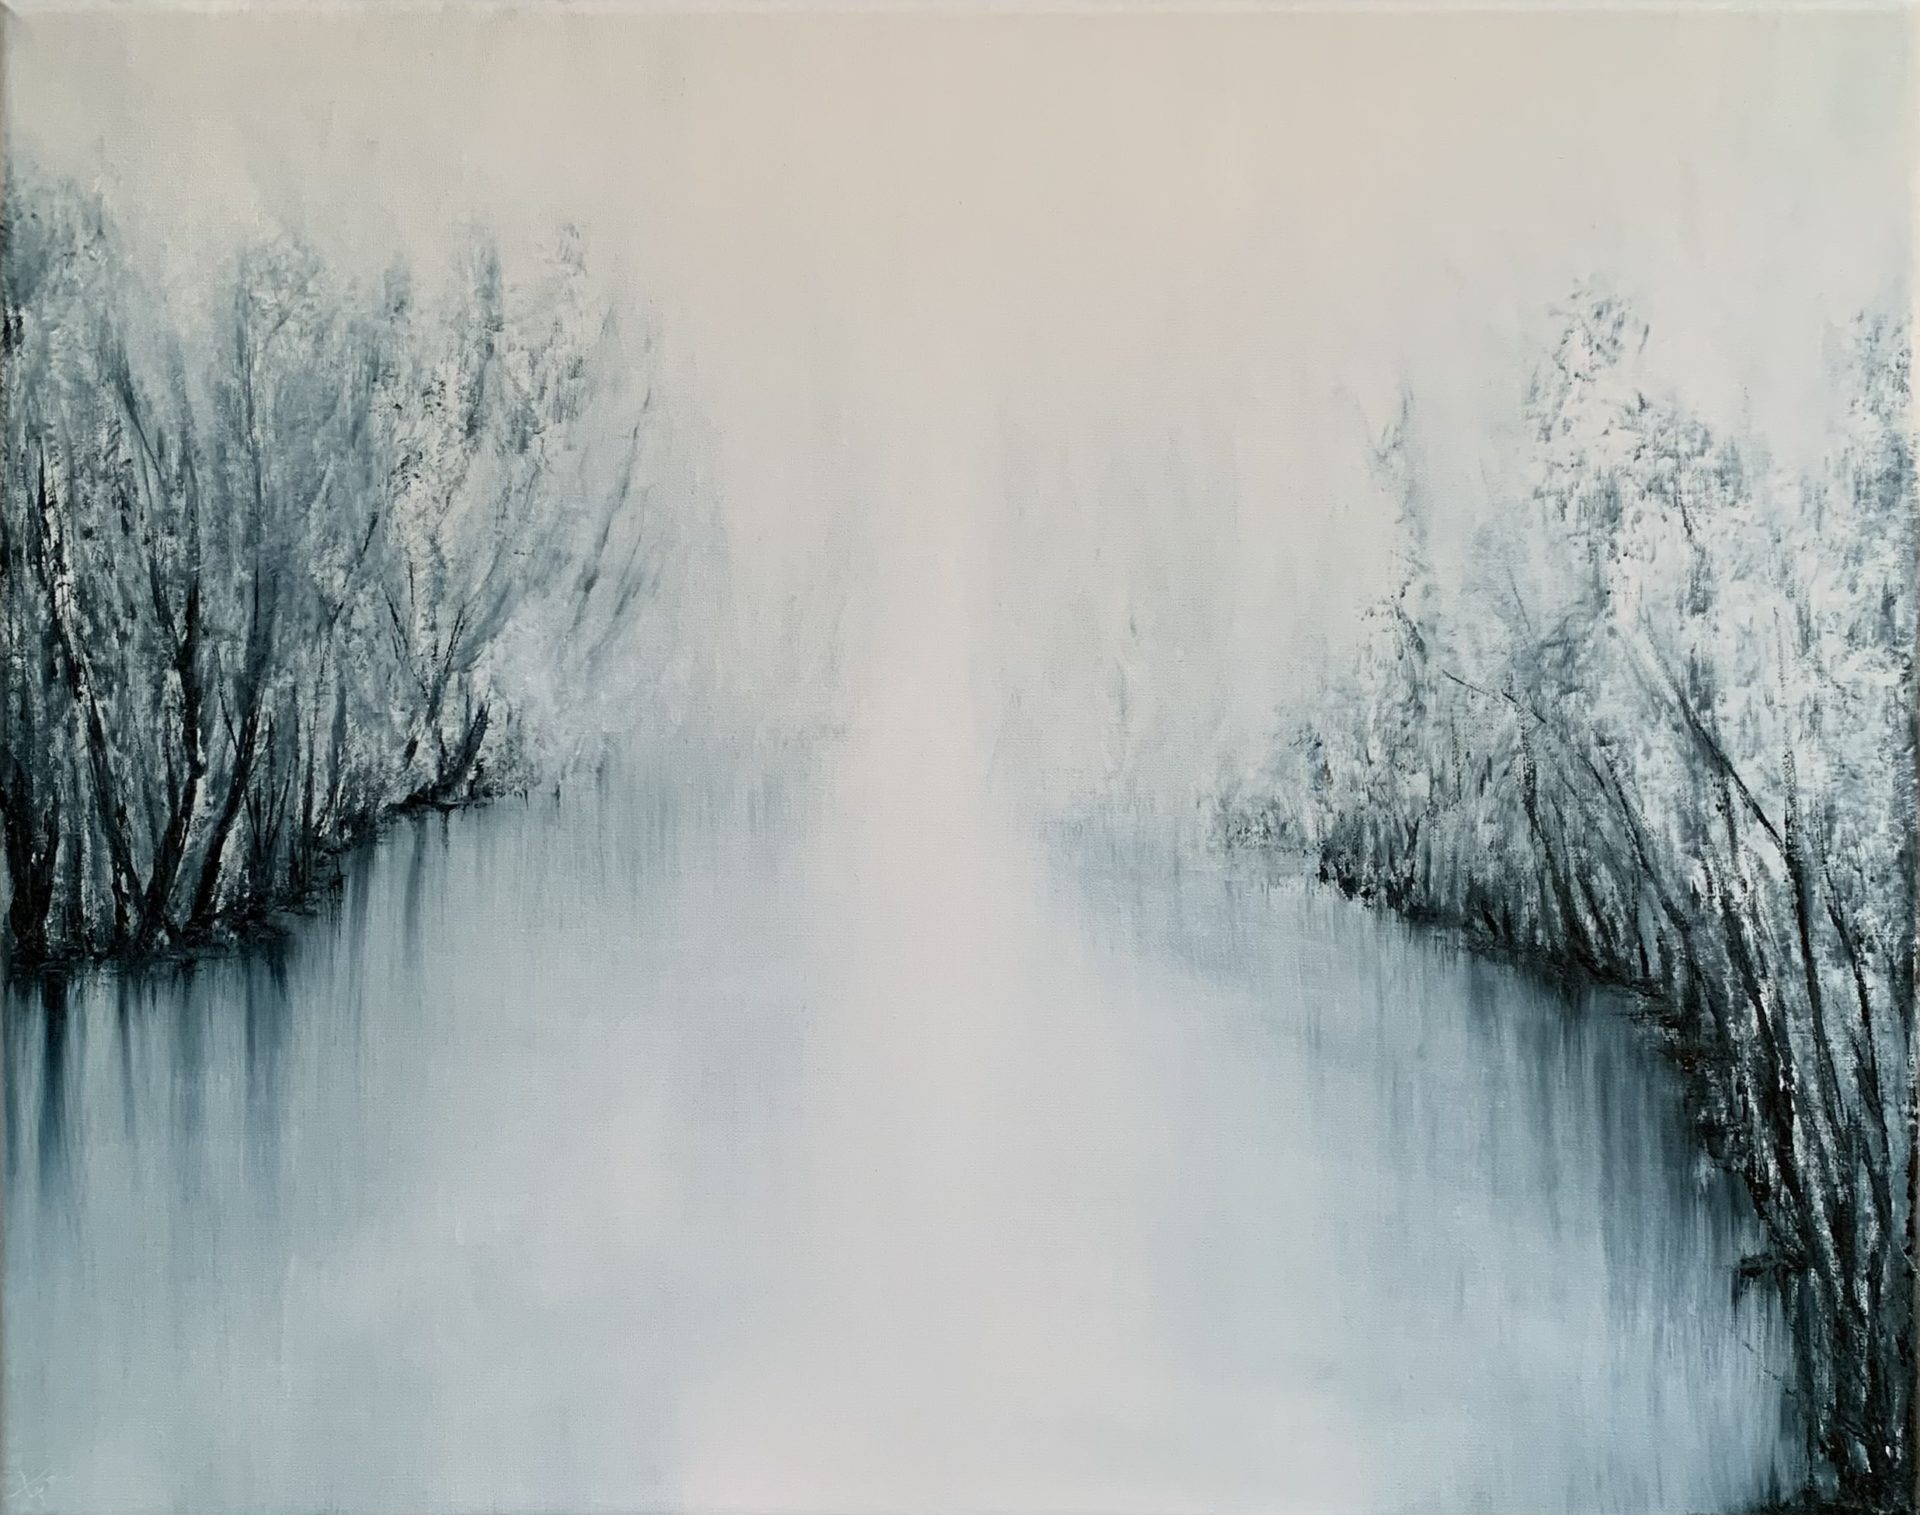 Original oil painting by Tisha Mark, "The Space Between" 16"x20" oil on linen (2023). Abstract foggy landscape painting, painted in a limited palette of blues and whites.